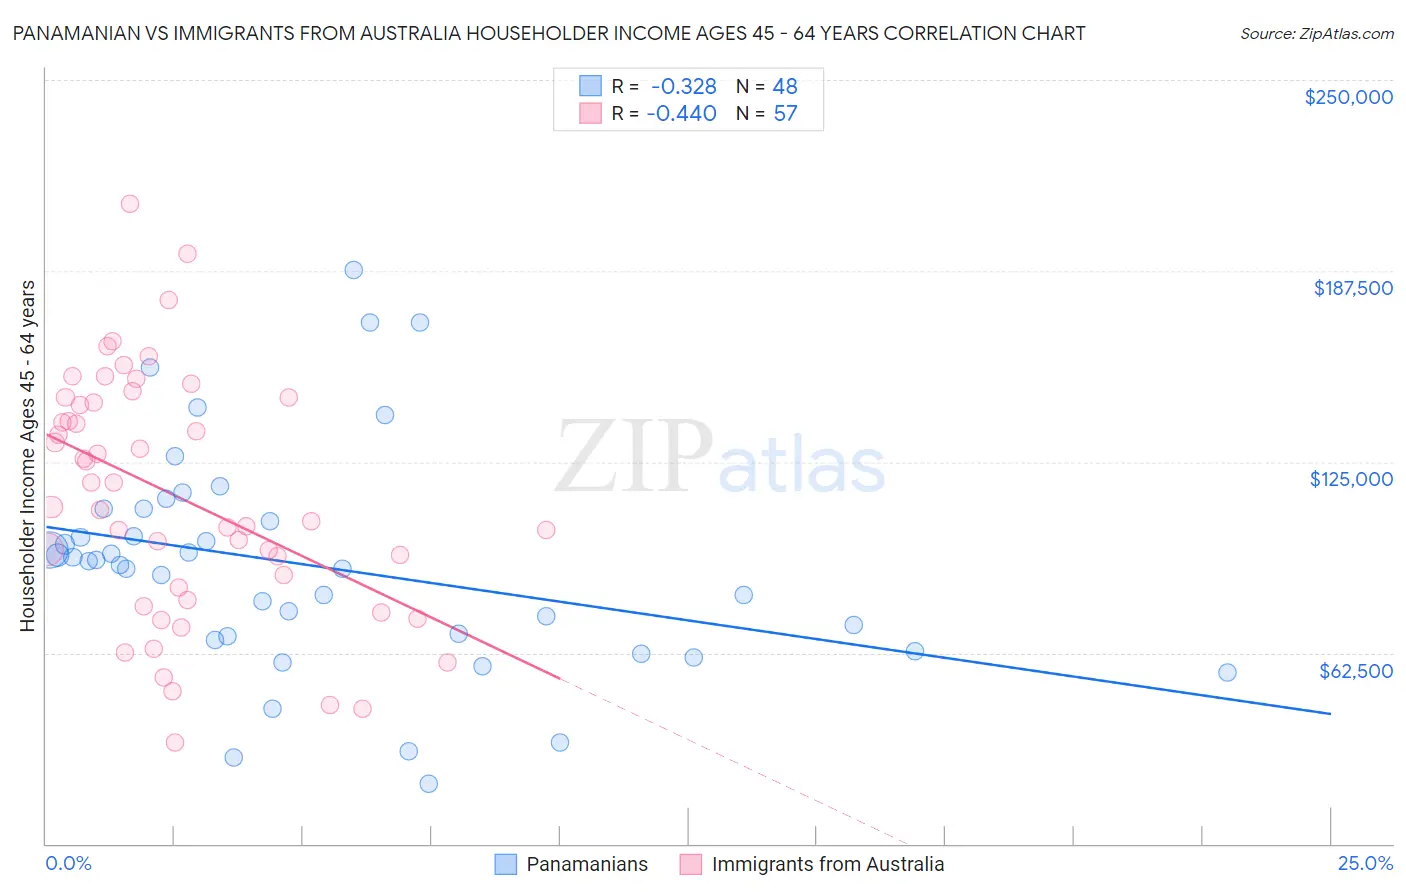 Panamanian vs Immigrants from Australia Householder Income Ages 45 - 64 years